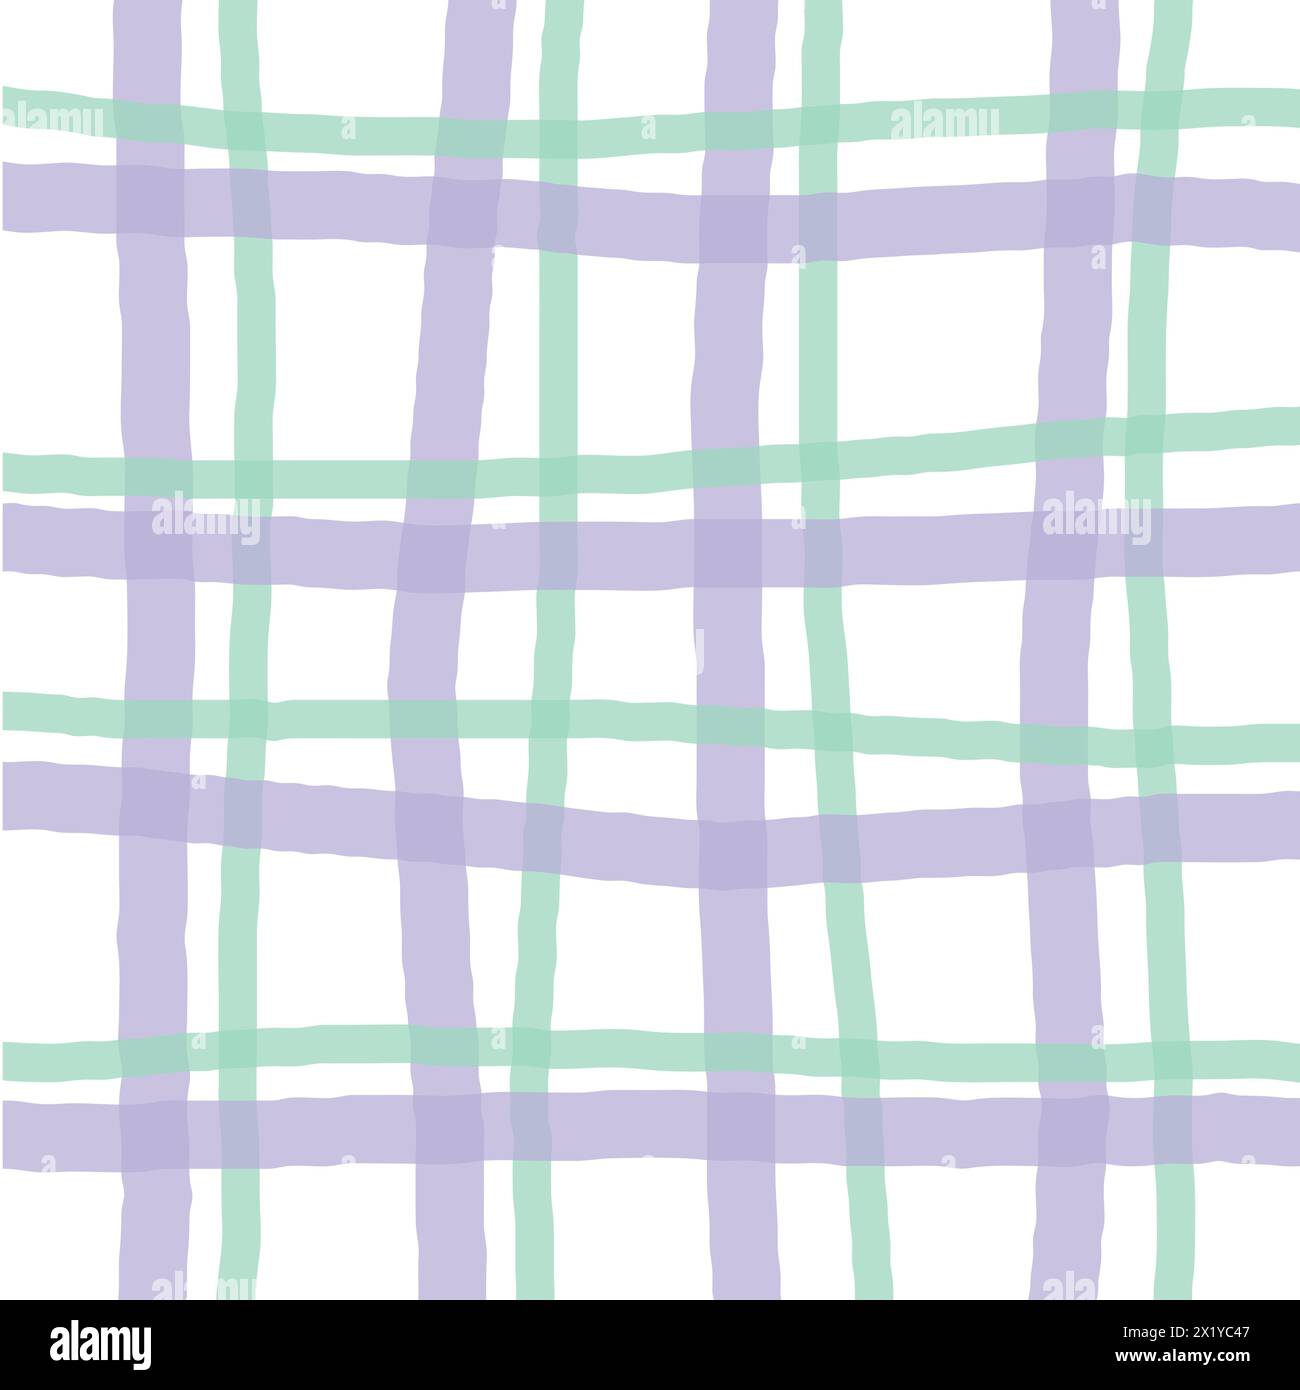 Vector hand drawn cute checkered pattern. cottagecore Doodle Plaid geometrical semitransparent simple texture. Crossing lines. Abstract cute delicate Stock Vector